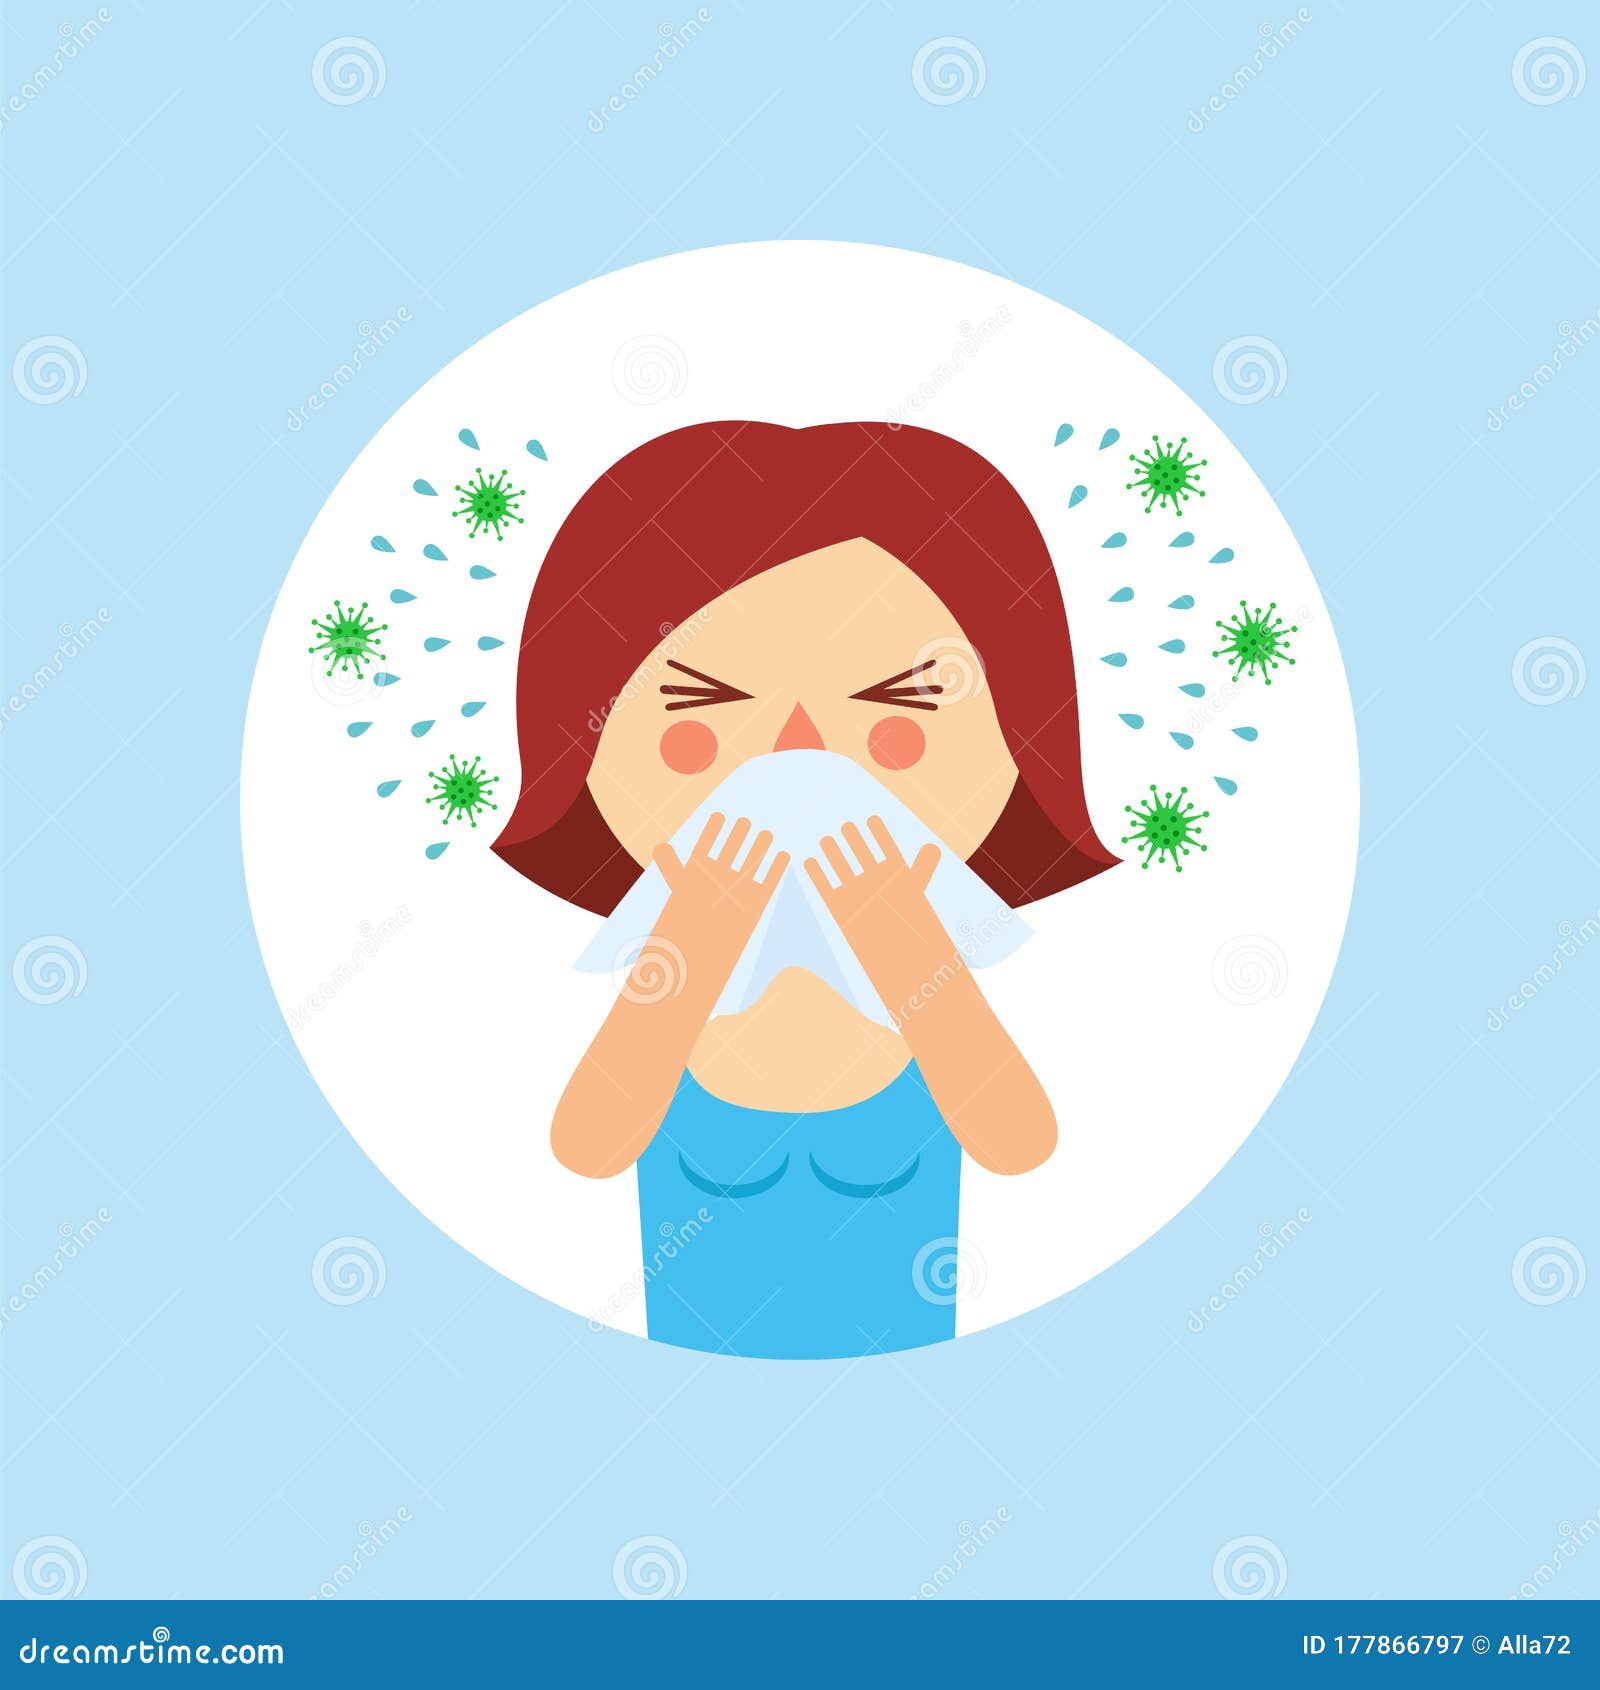 cartoon girl with a runny nose. a woman with a handkerchief sneezes, splashes and germs fly around. flu, viral disease.